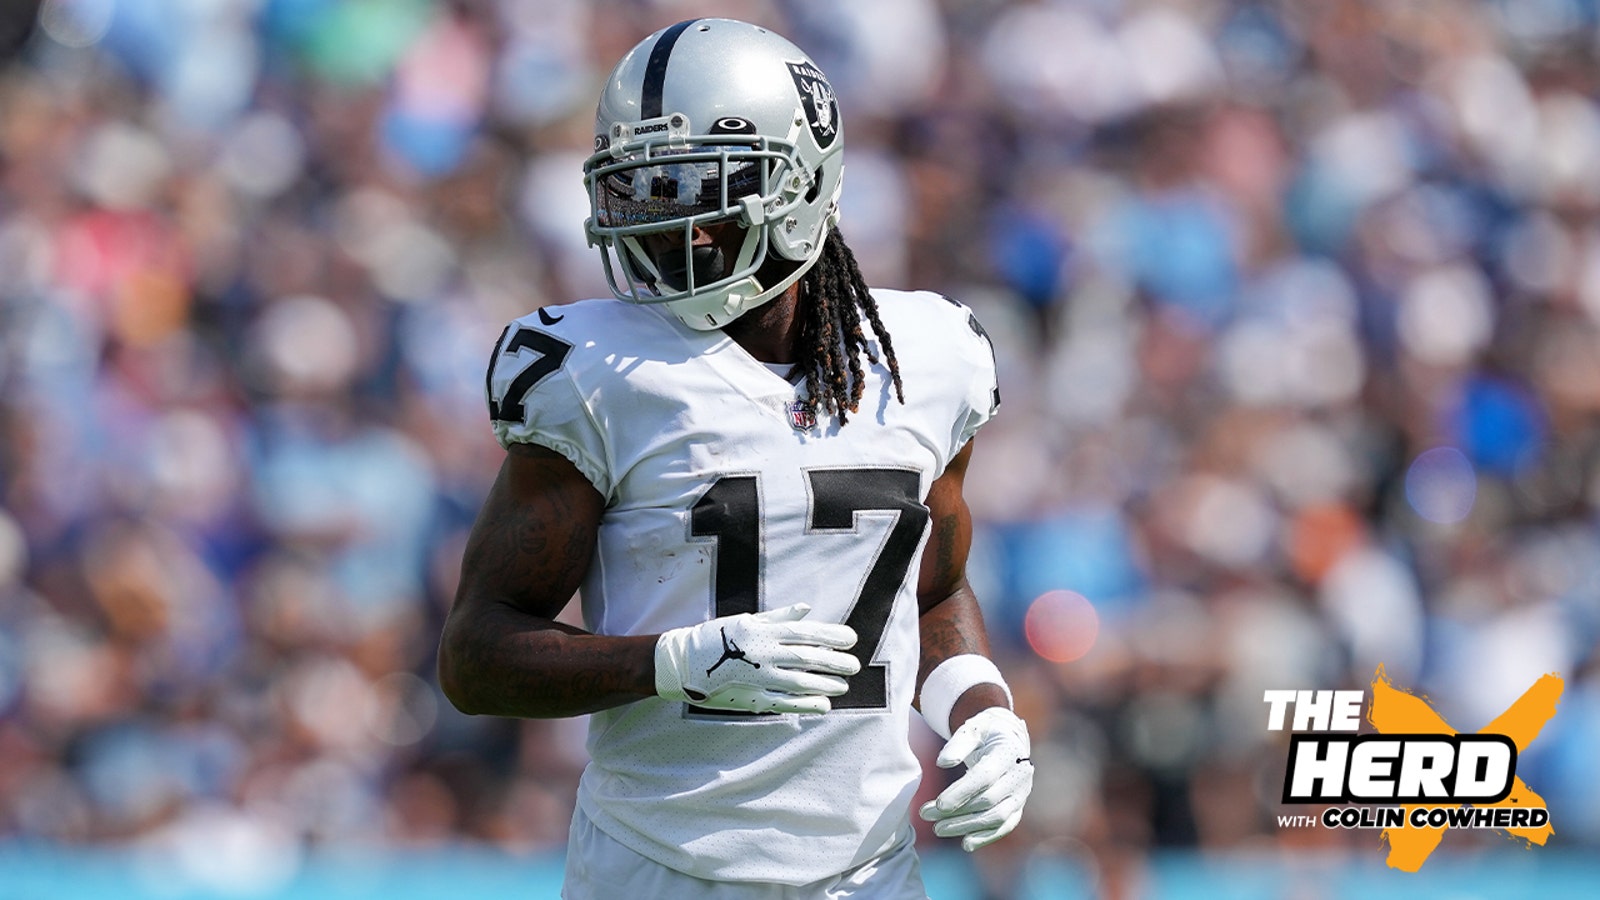 Davante Adams 'frustrated and angry' with Raiders 0-3 start 